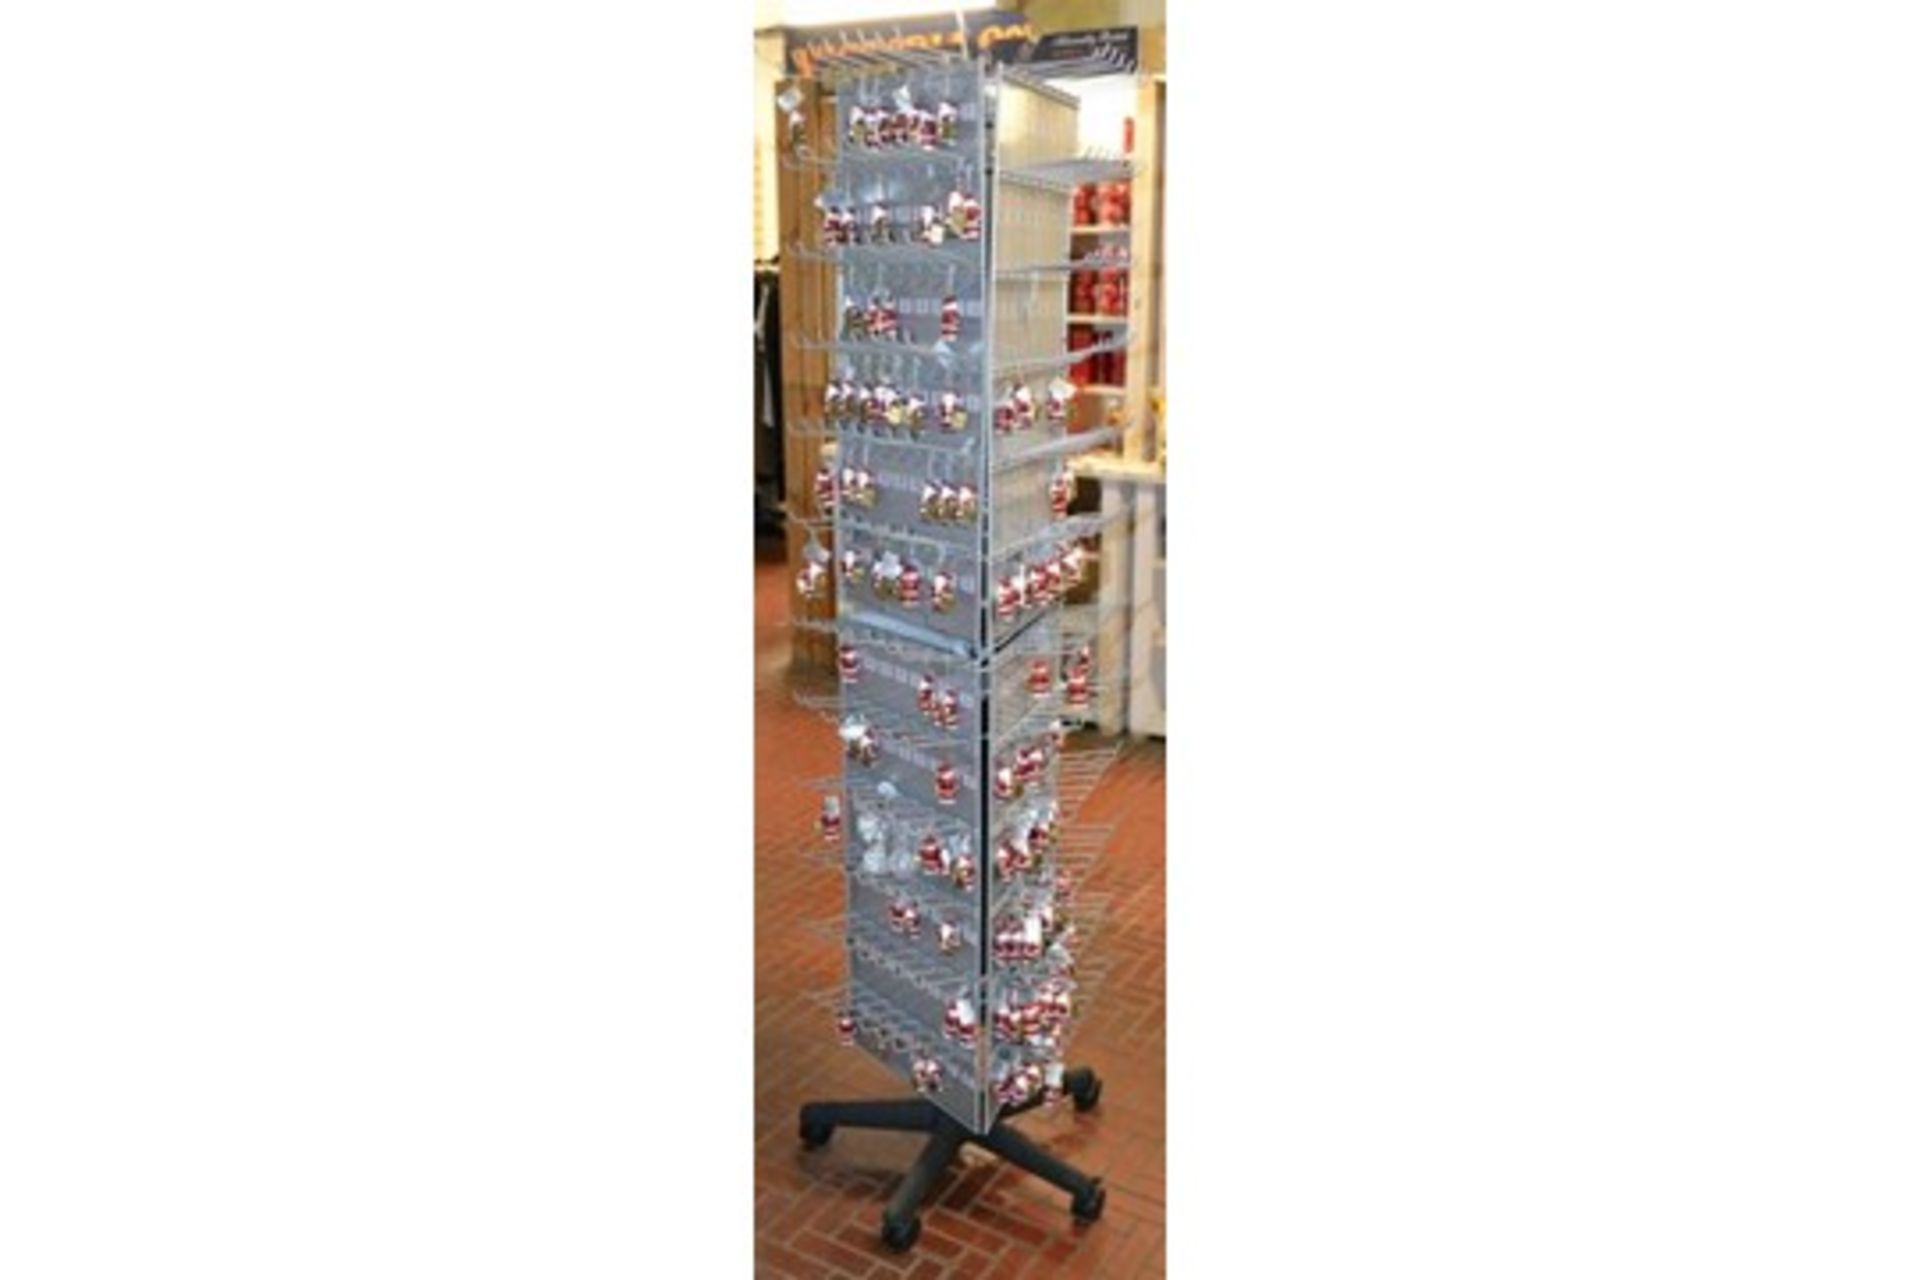 27 x Retail Carousel Display Stands With Approximately 2,800 Items of Resale Stock - Includes - Image 37 of 61